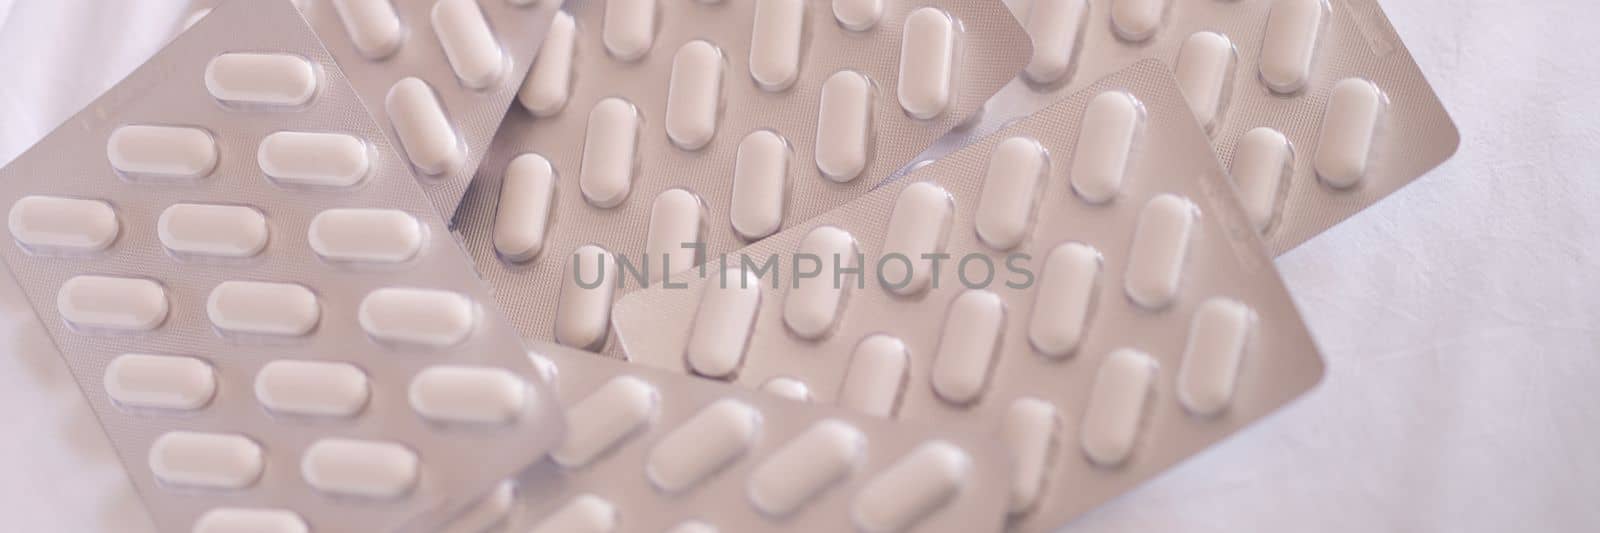 Heaps of blisters with medical pills on table by kuprevich